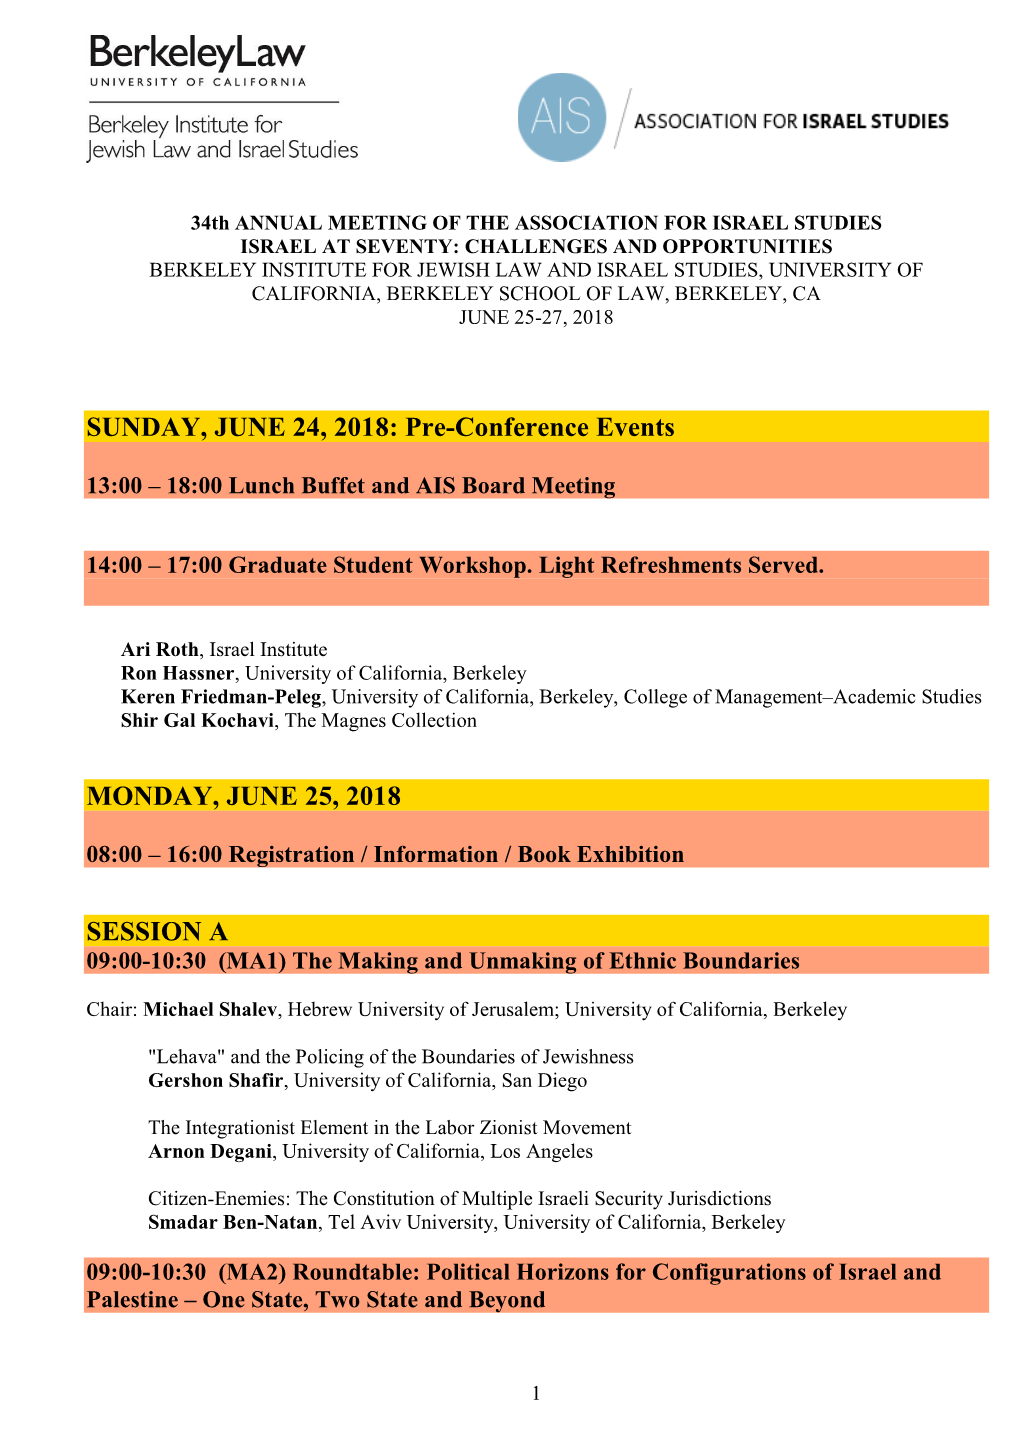 SUNDAY, JUNE 24, 2018: Pre-Conference Events